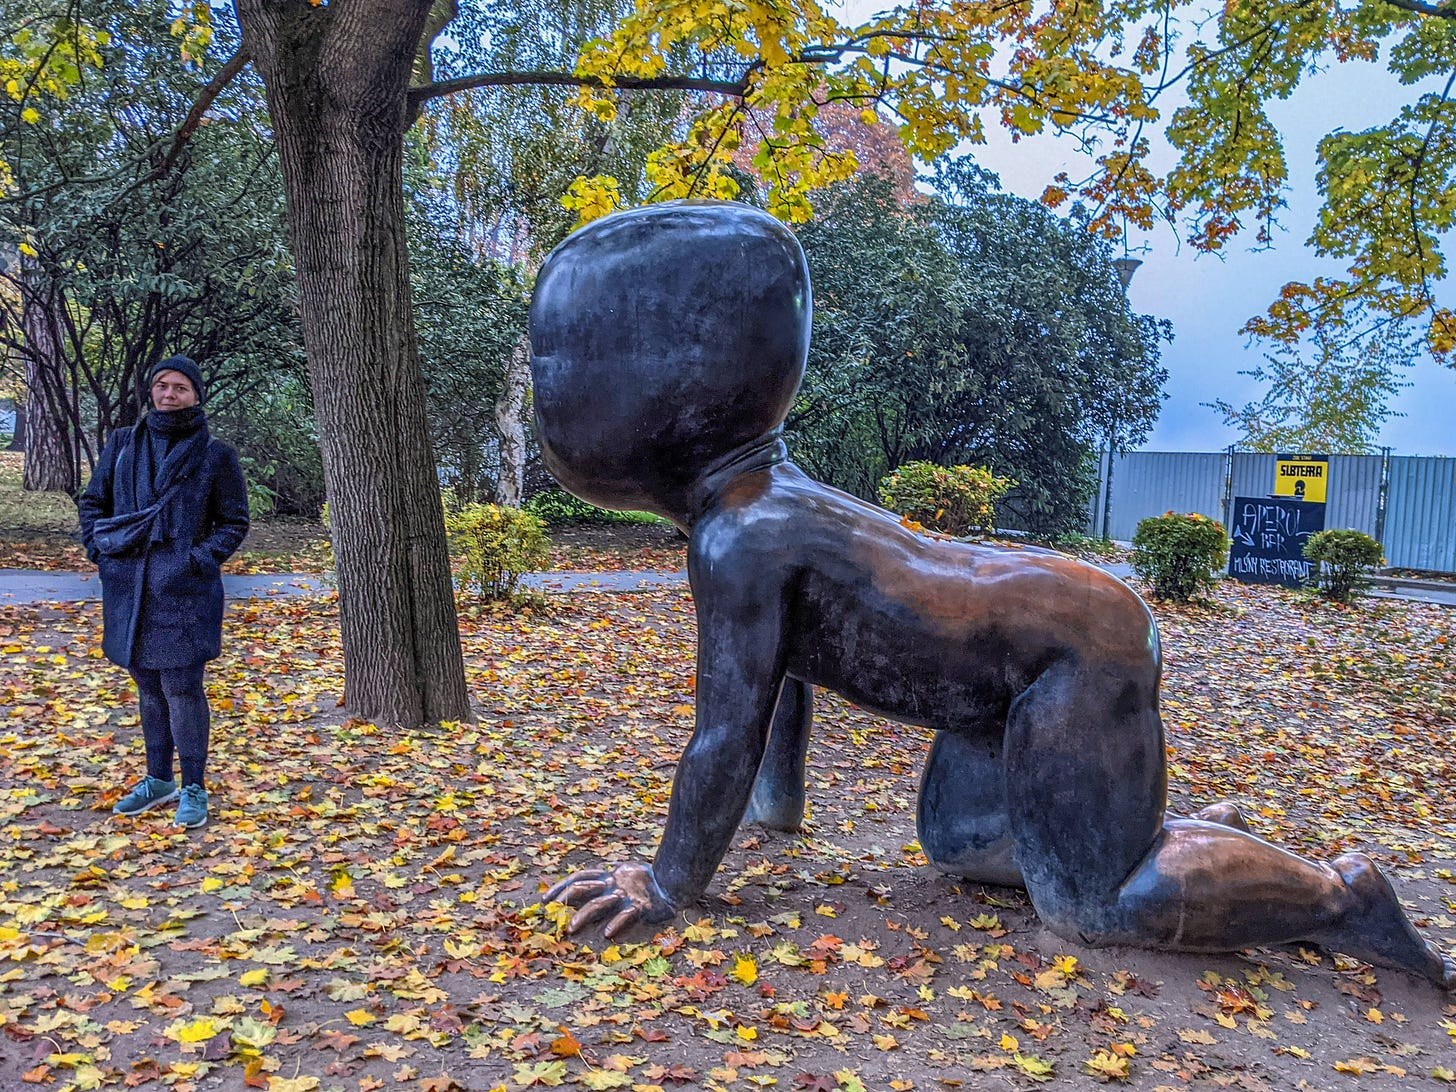 A woman stands next to a sculpture of a giant crawling baby in a park.